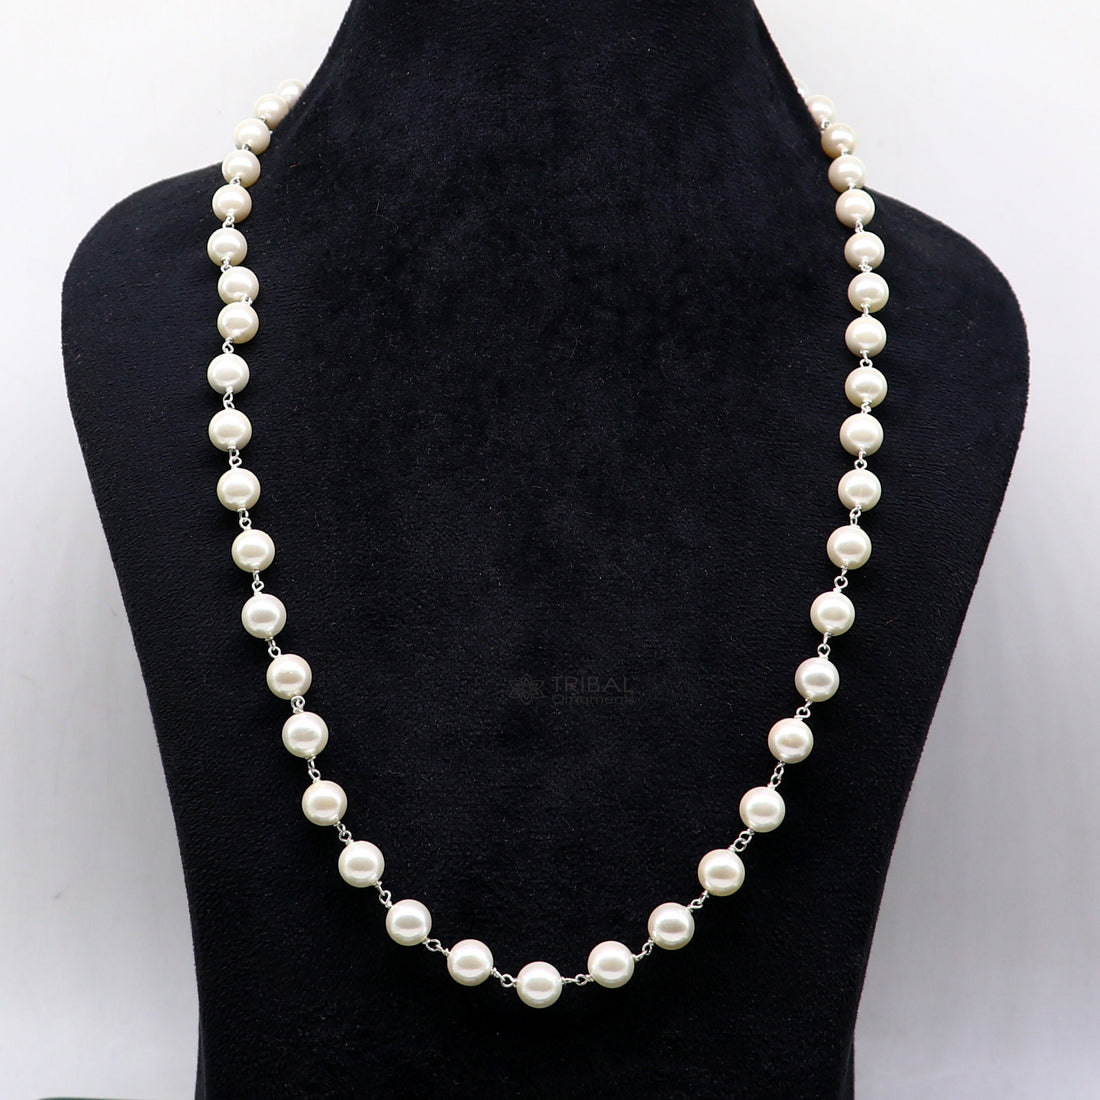 8mm mother of pearls custom made 925 sterling silver long beaded necklace, gorgeous girl's women's daily use best gifting beaded chain ch556 - TRIBAL ORNAMENTS